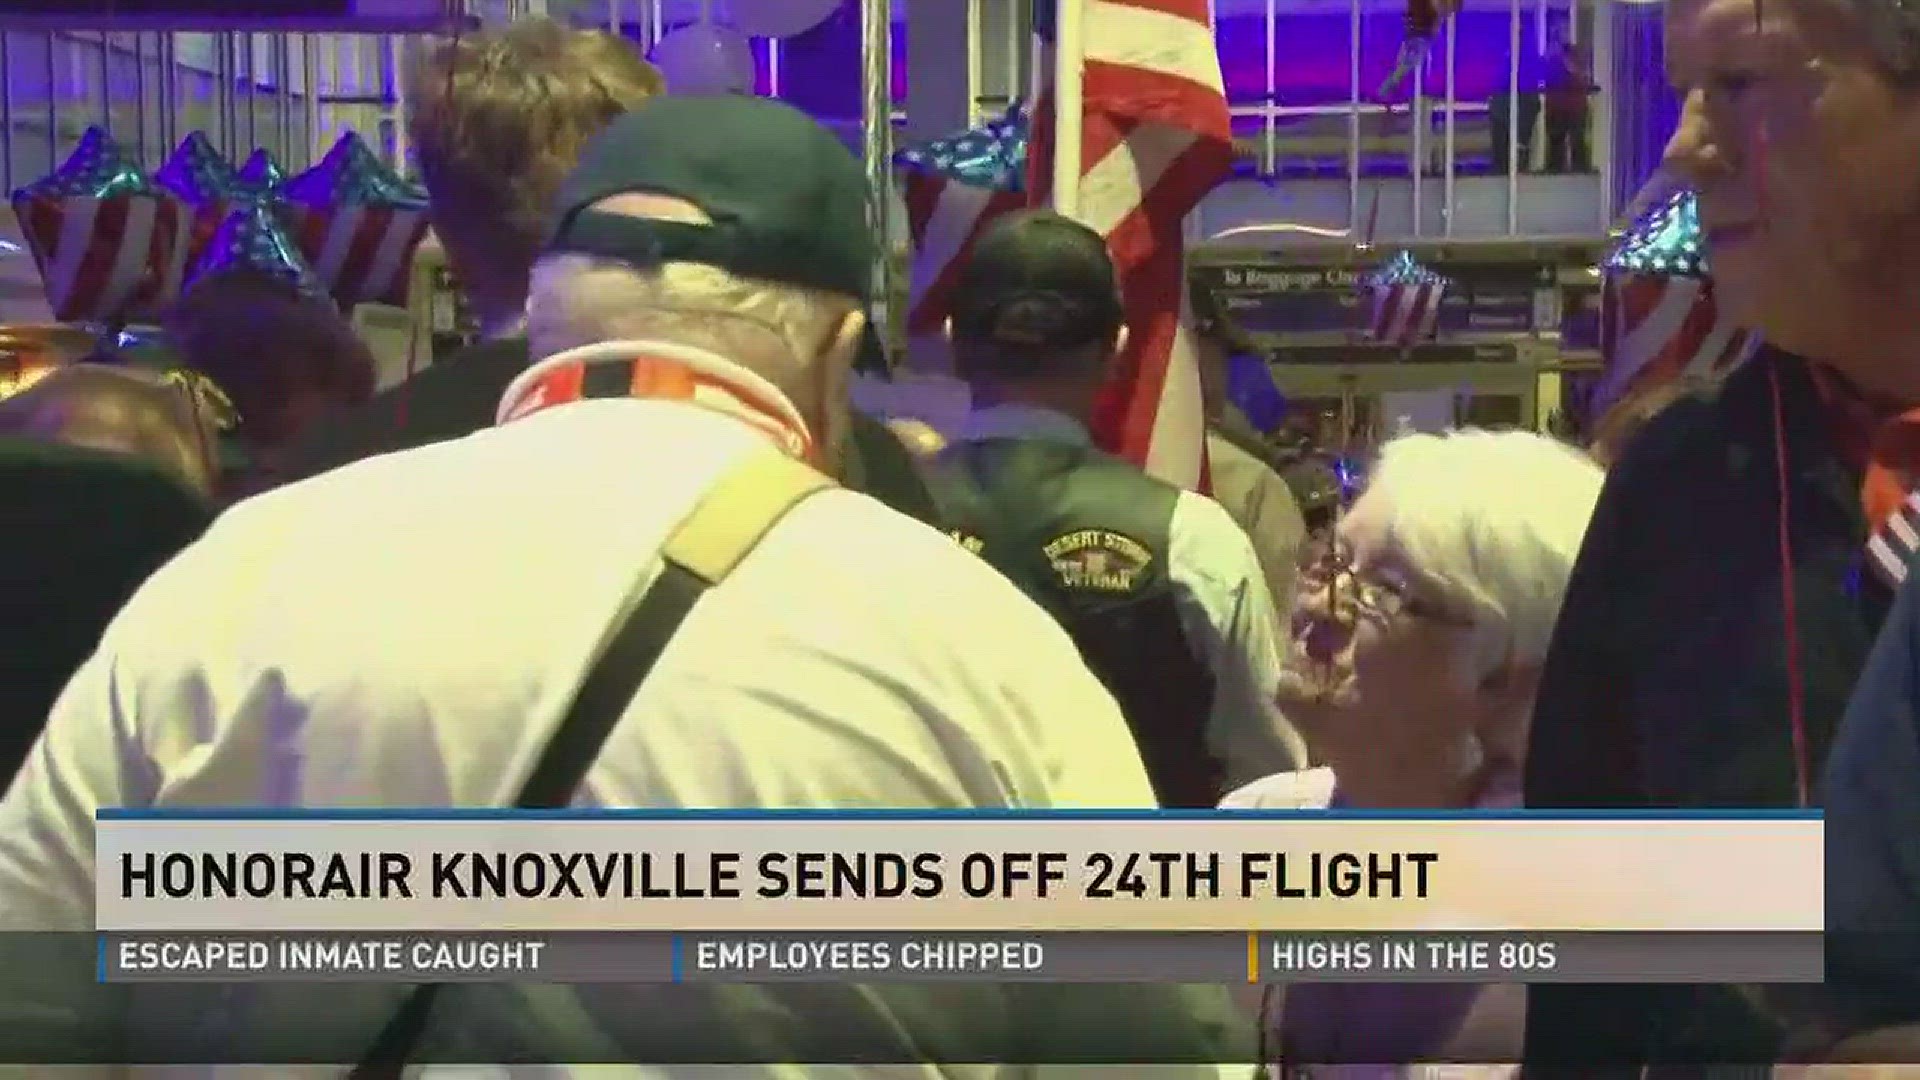 The flight sends veterans on an all-expense paid trip to the nation's capital.